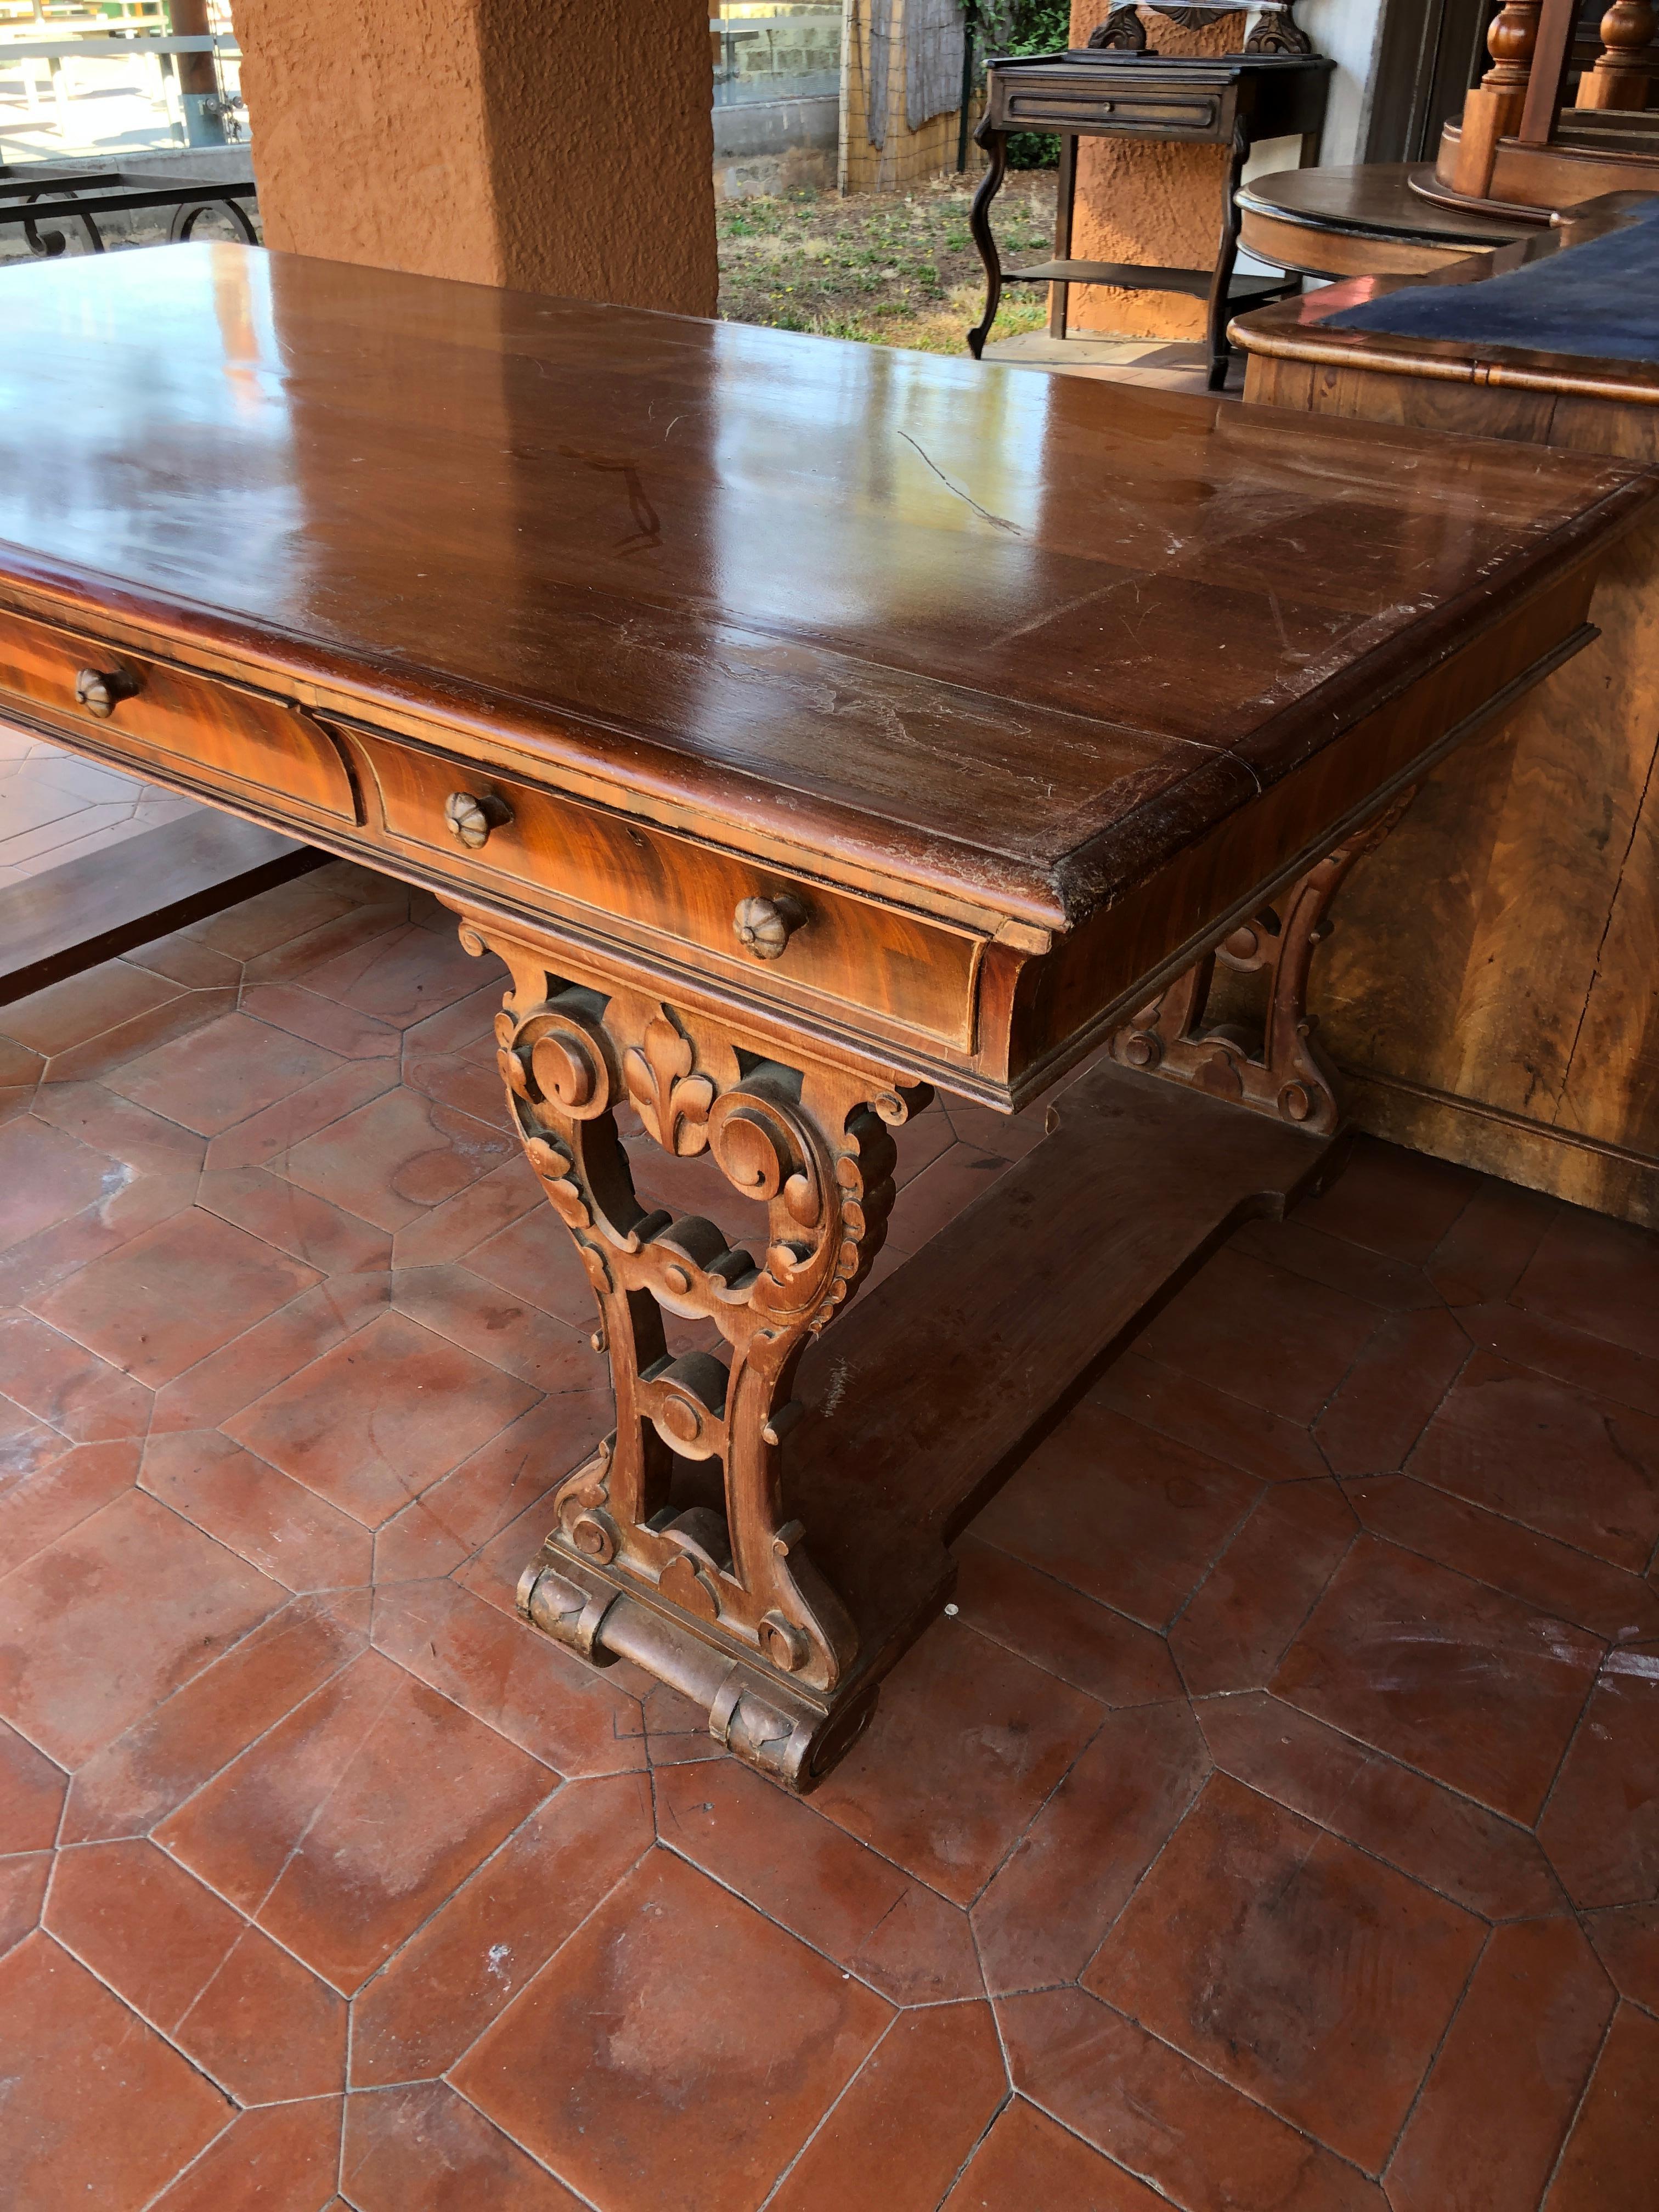 Rare Victorian center desk, in mahogany circa 1860, we note that the legs of the desk are a work of art of carving, in the best English tradition of that period. Present eight wheels to be able to easily move the desk (I wouldn't do it on a parquet